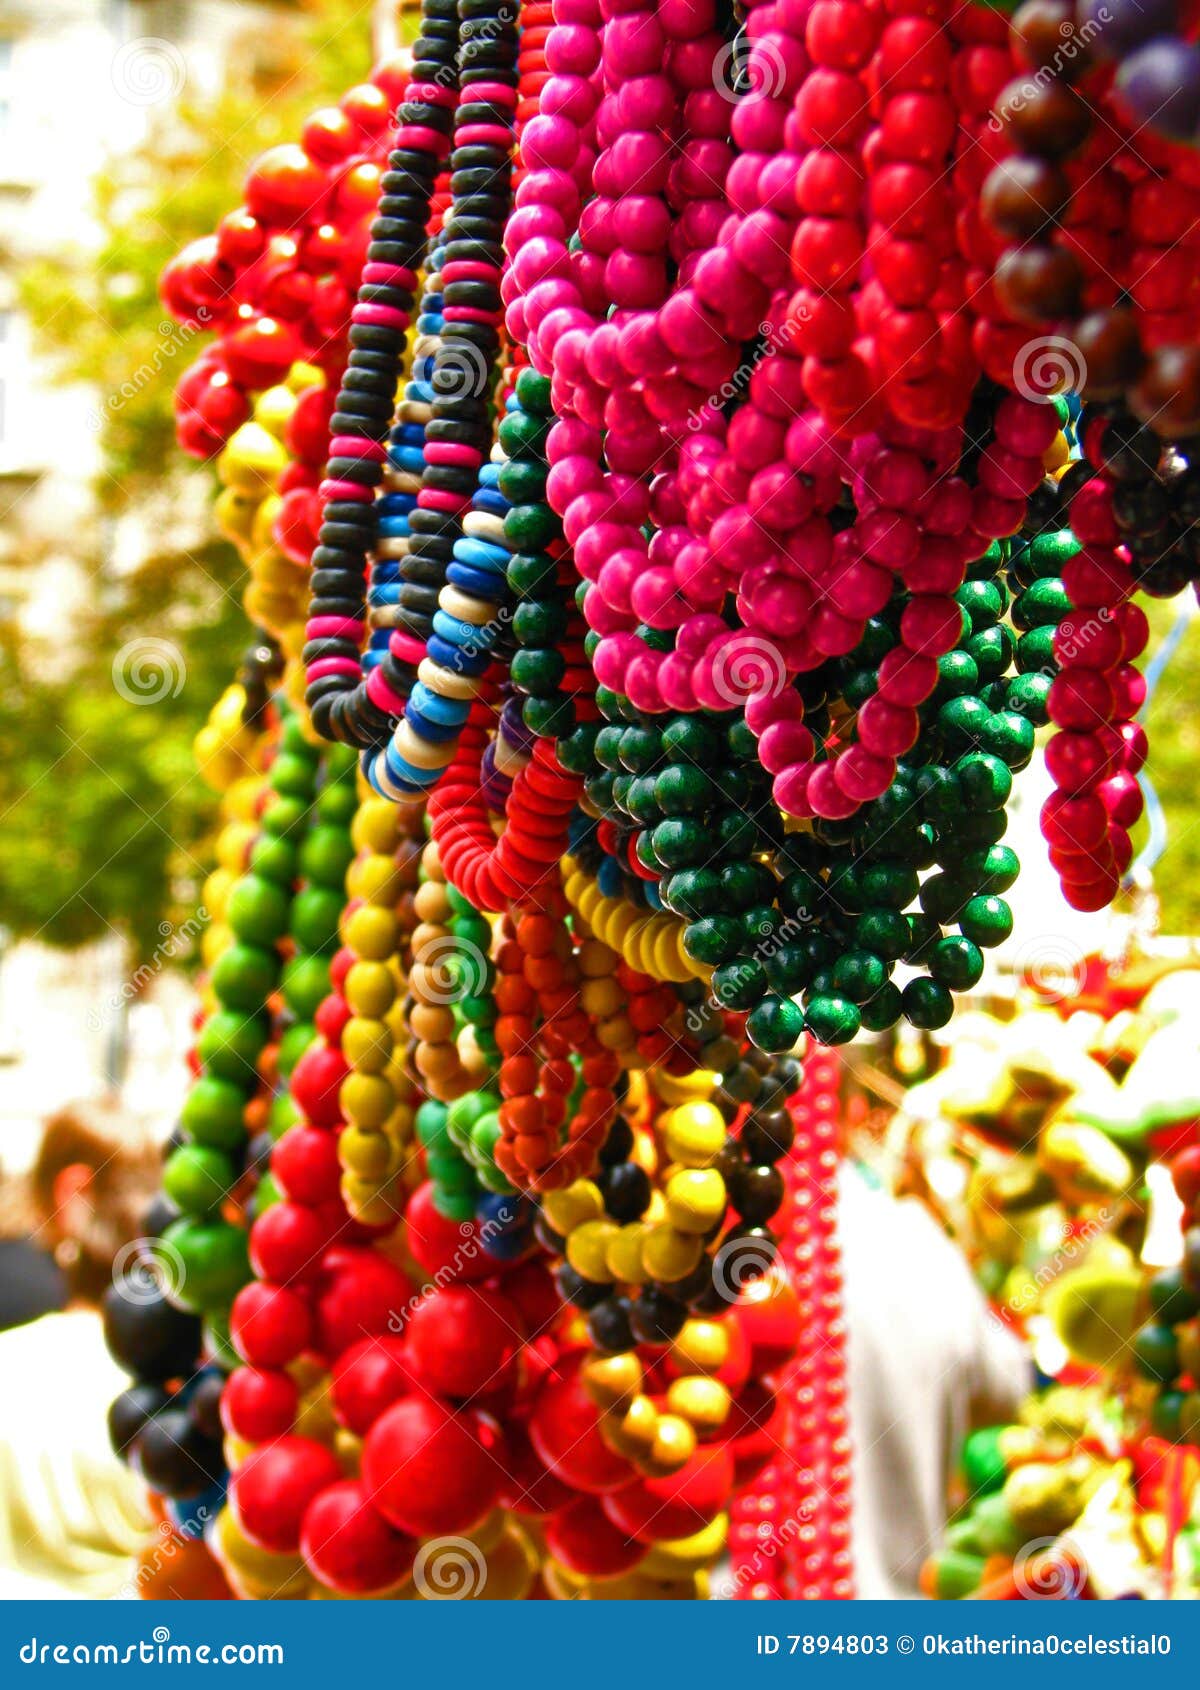 various colorful beads